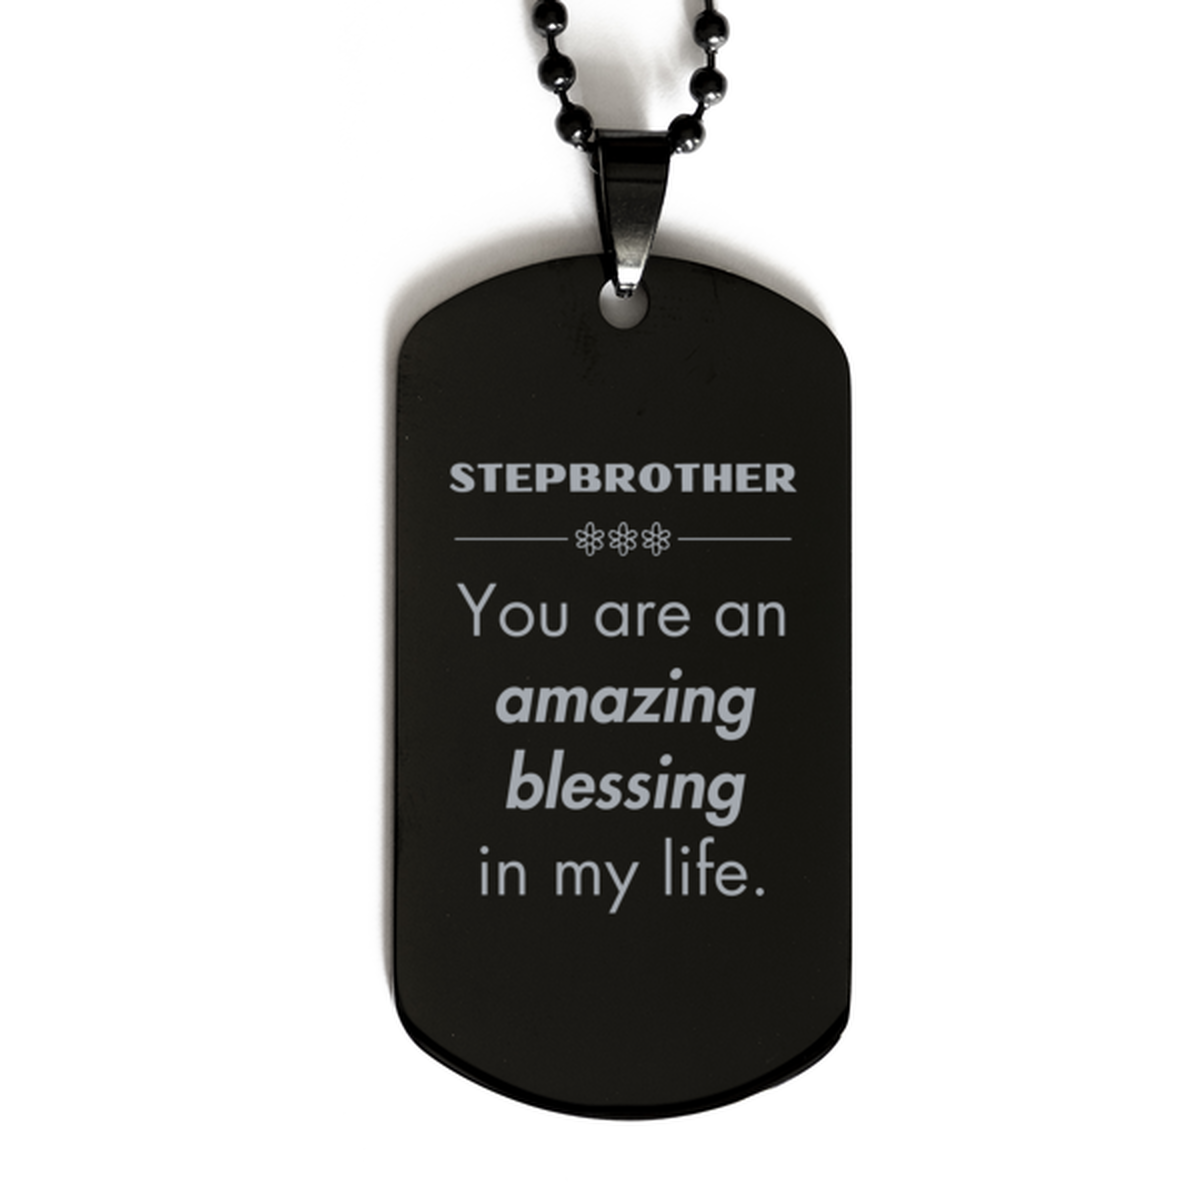 Stepbrother Black Dog Tag, You are an amazing blessing in my life, Thank You Gifts For Stepbrother, Inspirational Birthday Christmas Unique Gifts For Stepbrother